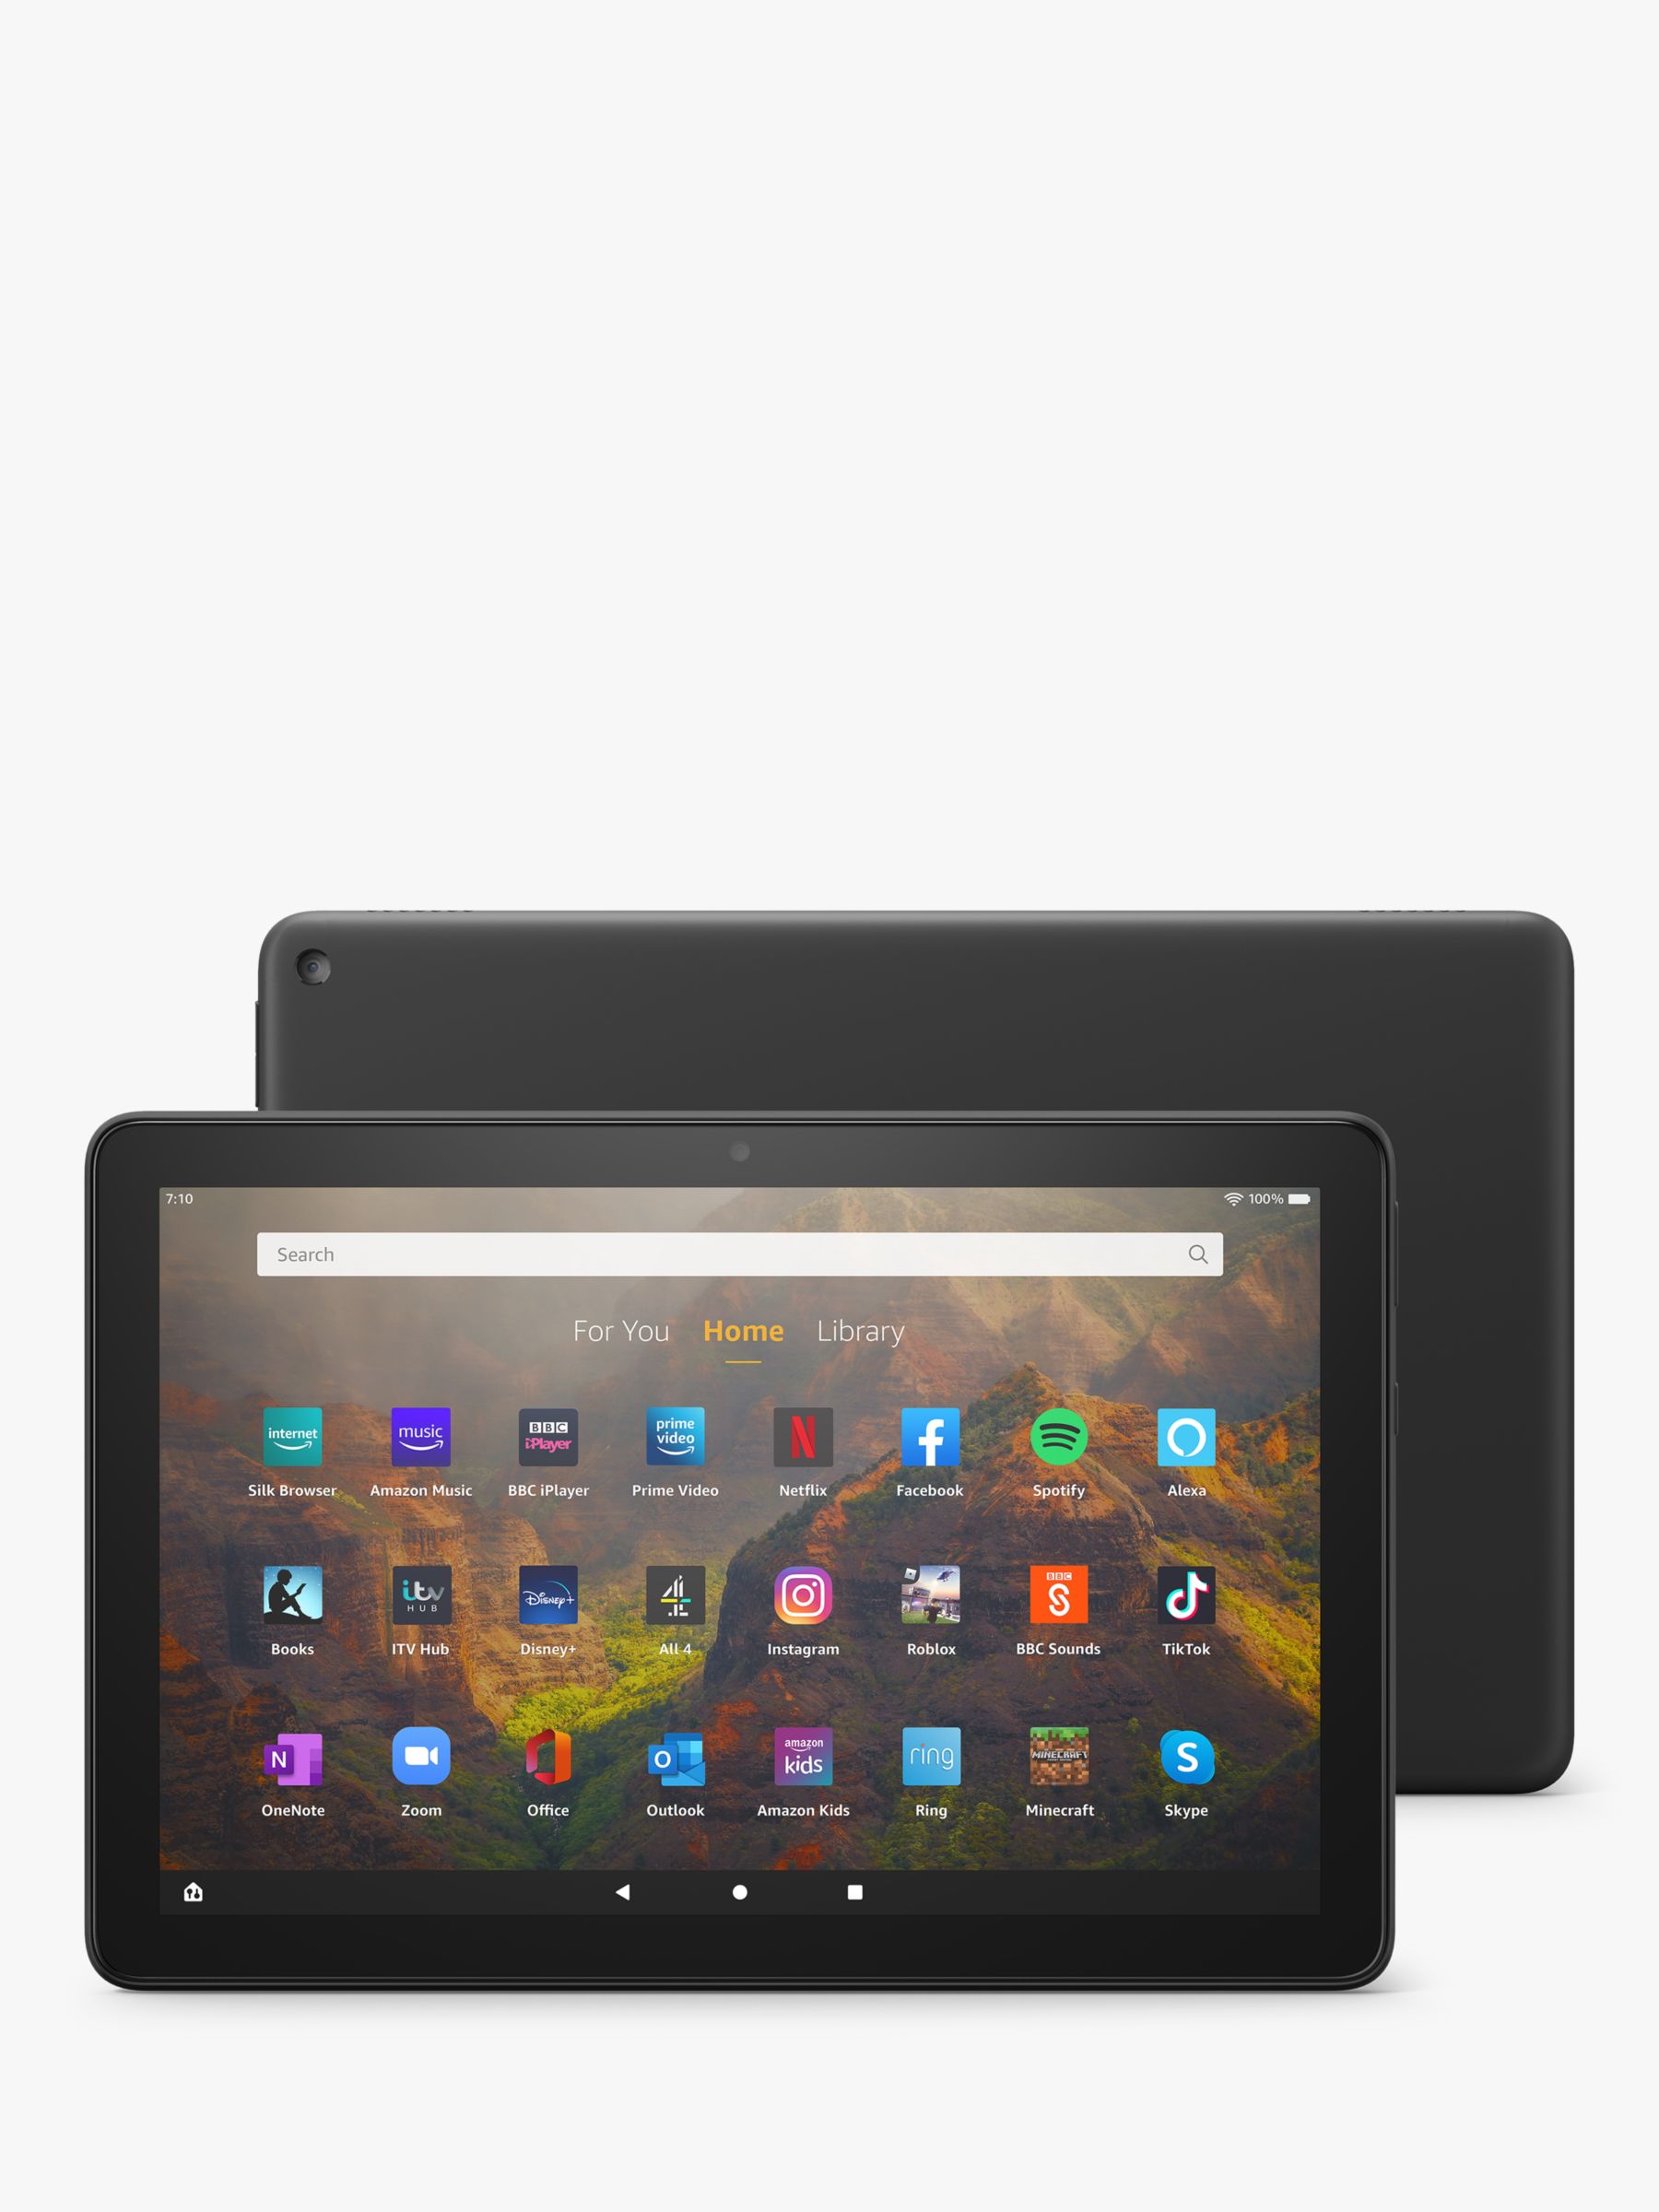 Amazon Fire HD 10 Tablet (11th Generation) with Alexa Hands-Free,  Octa-core, Fire OS, Wi-Fi, 32GB, 10.1